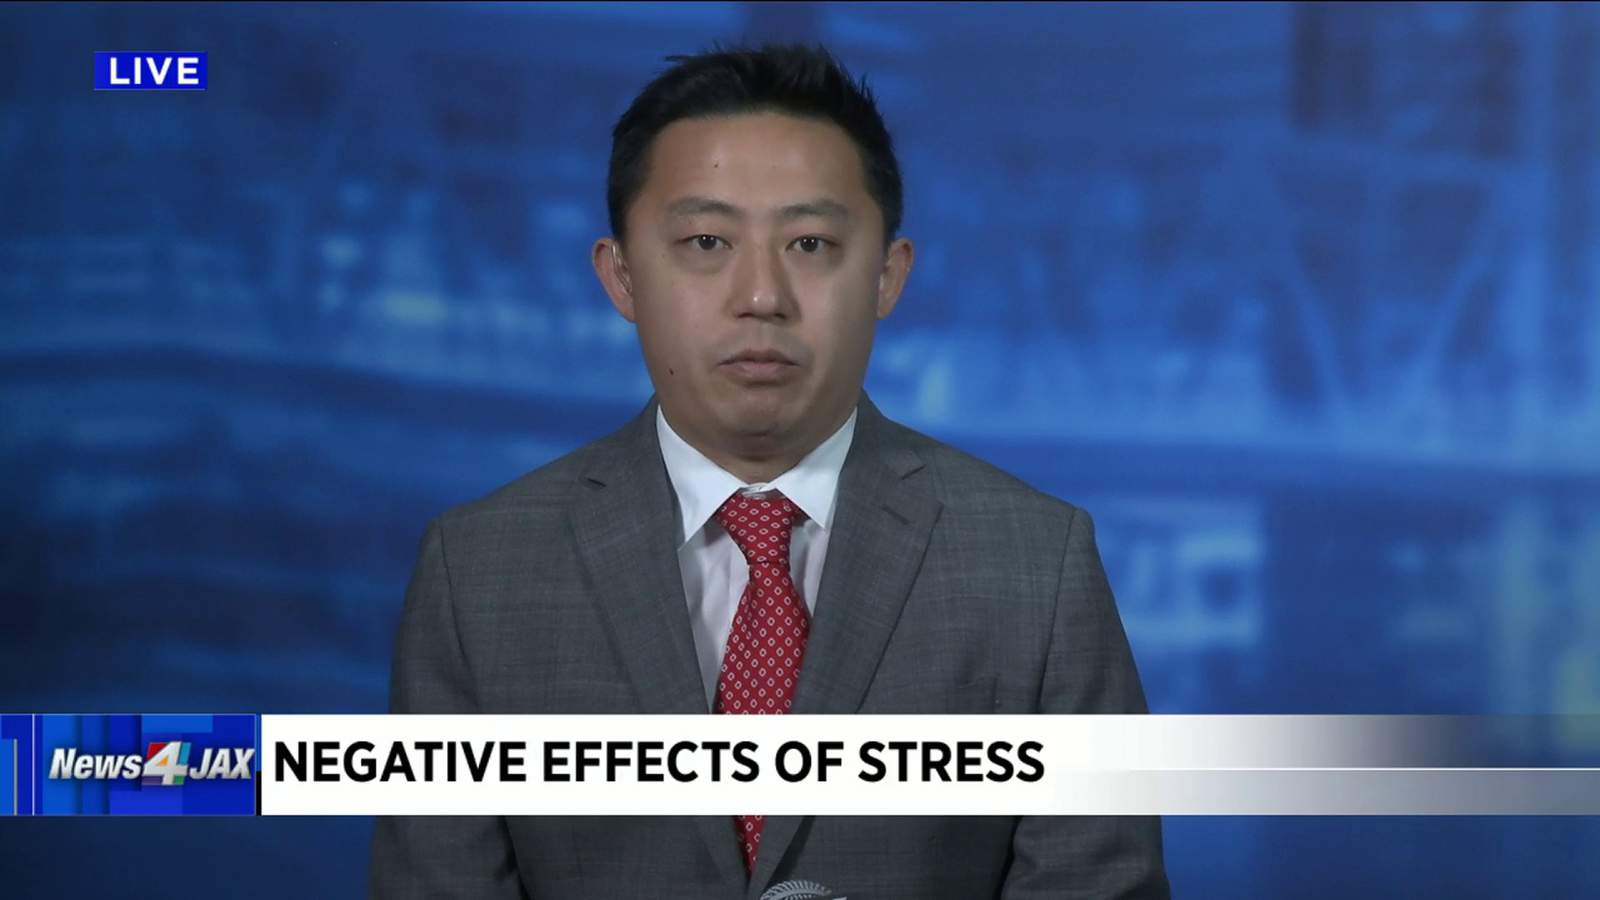 Negative health effects of stress from COVID-19